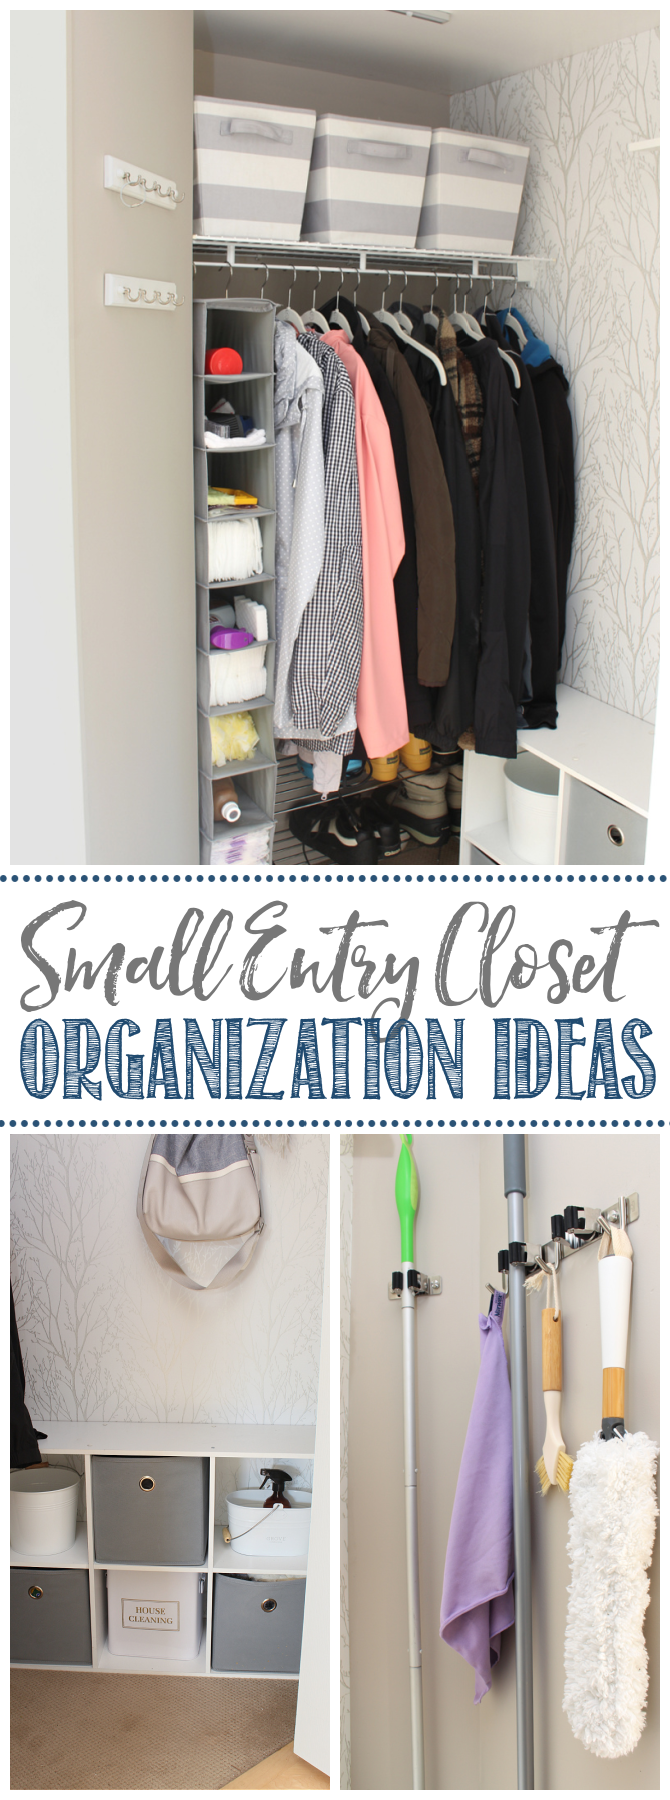 How To Organize an Entry Way Closet / Make the Most of an Awkward